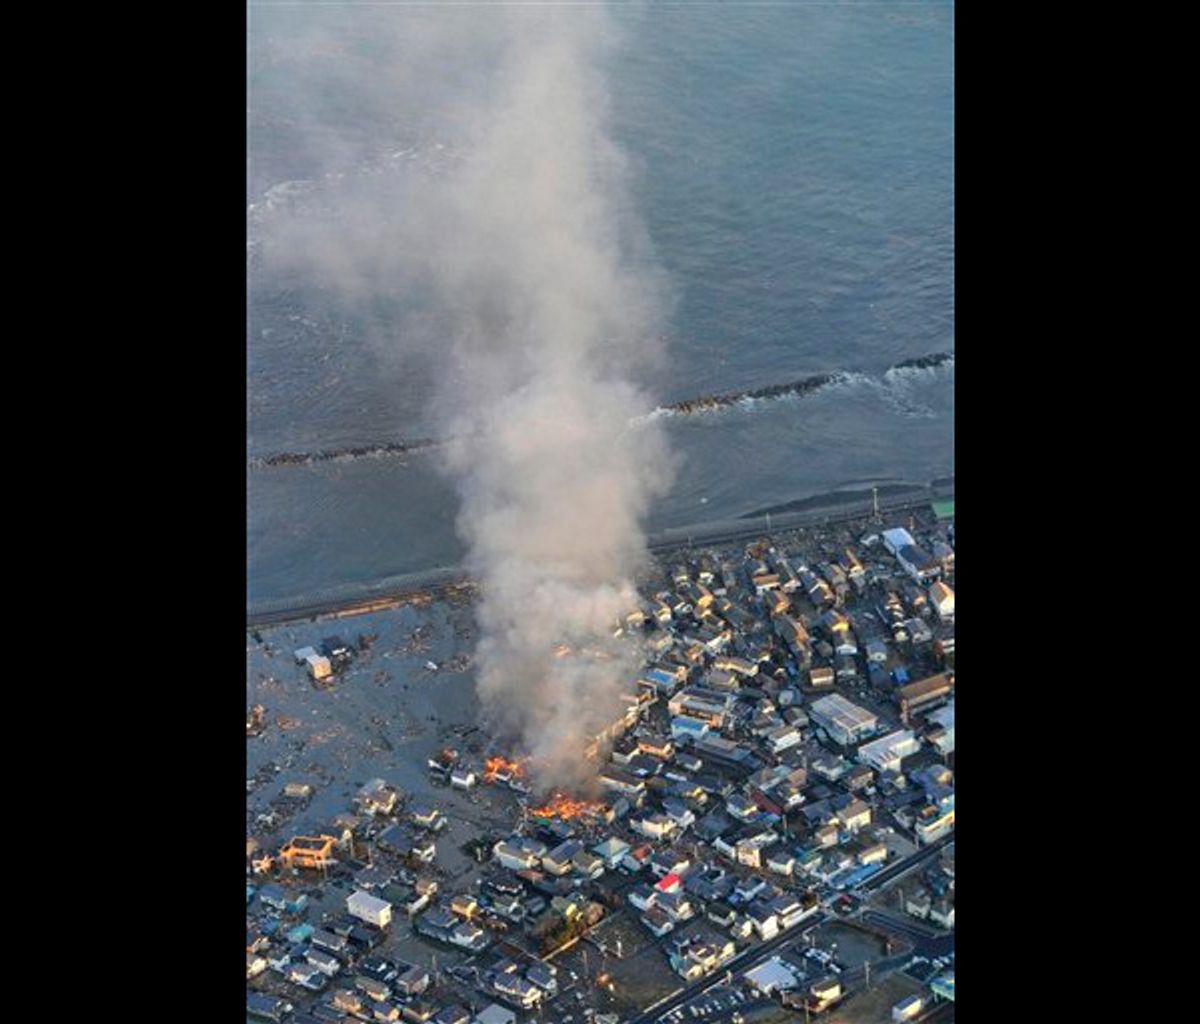 Fire smokes billow from residences as a coastal area is flooded by waters after a tsunami in Iwaki, Fukushima prefecture (state), Japan, Friday, March 11, 2011. (AP/Kyodo News)